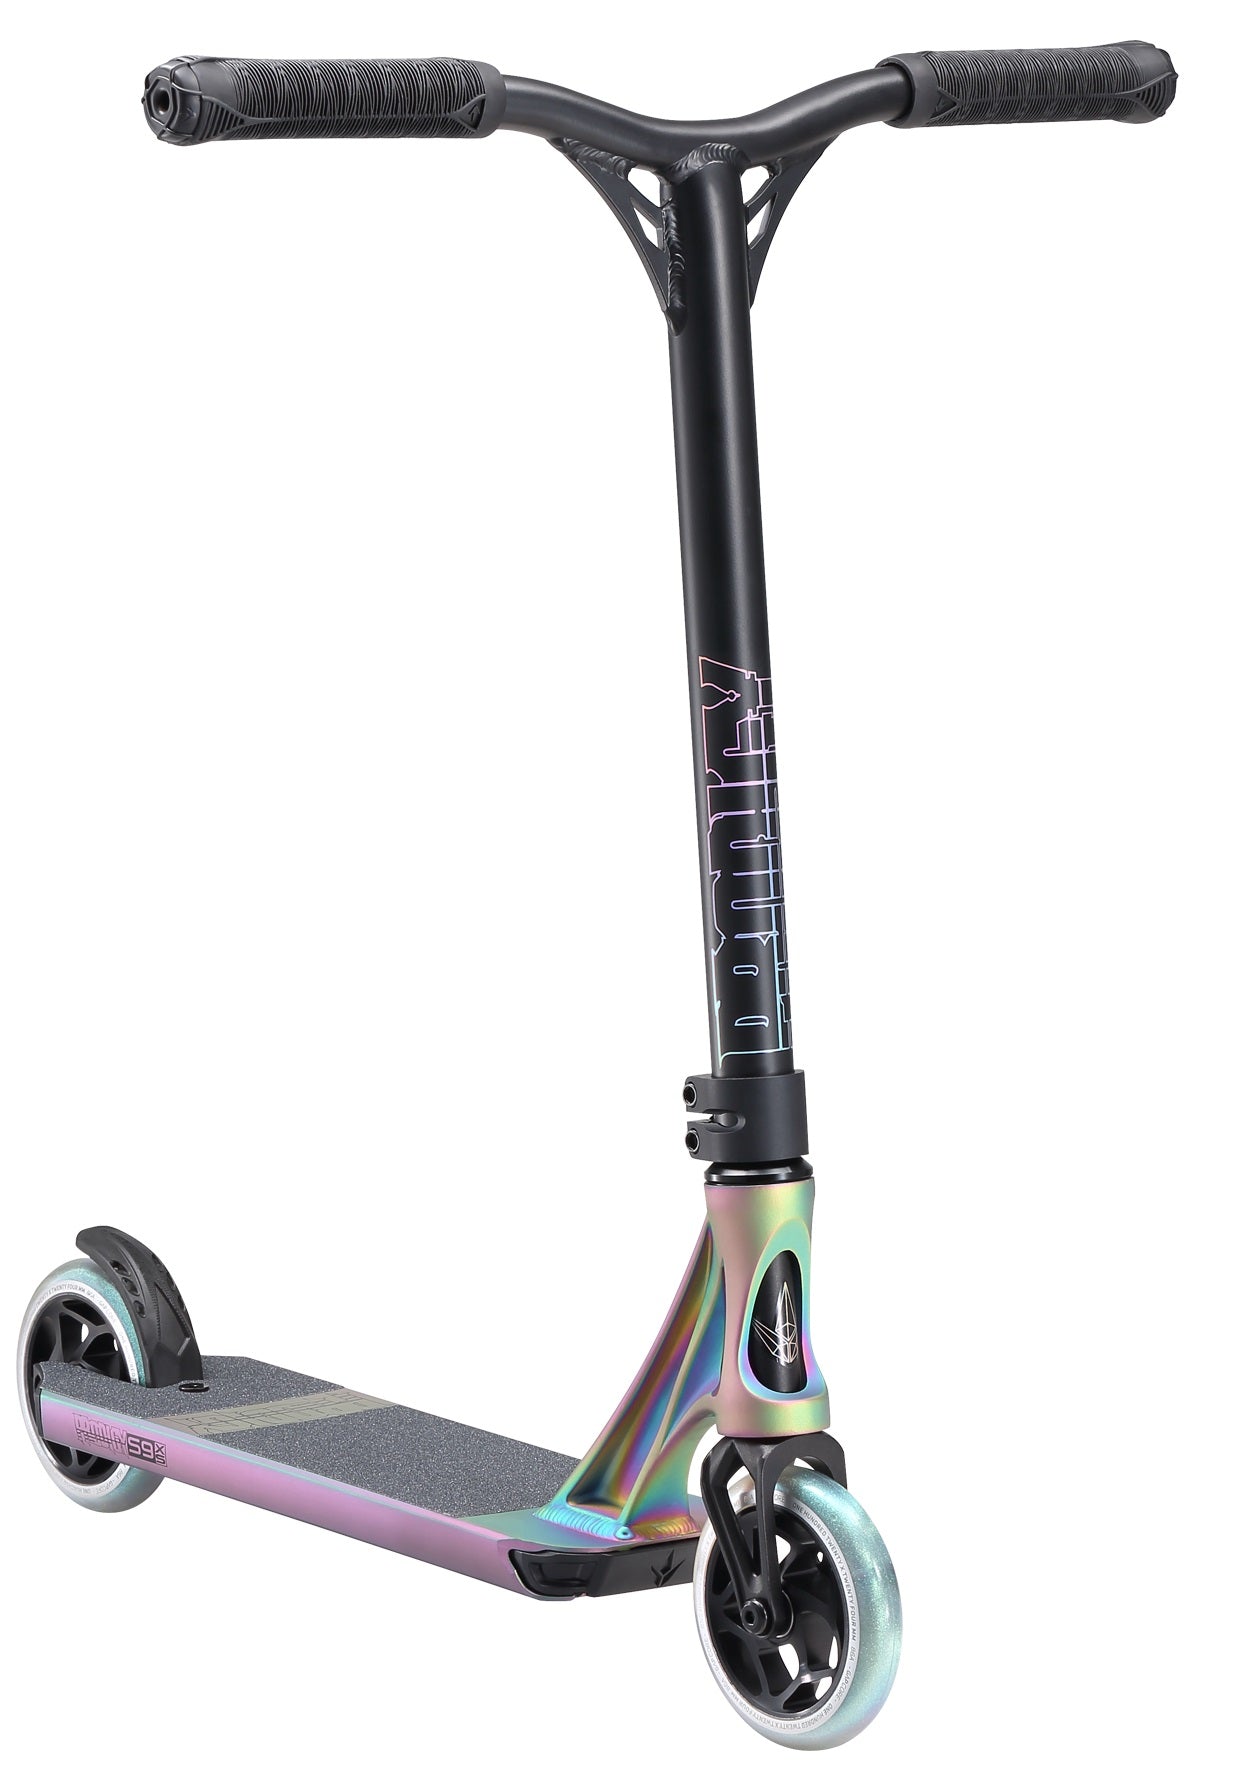 Blunt Envy Prodigy S9 XS Stunt Scooter - Matted Oil Slick